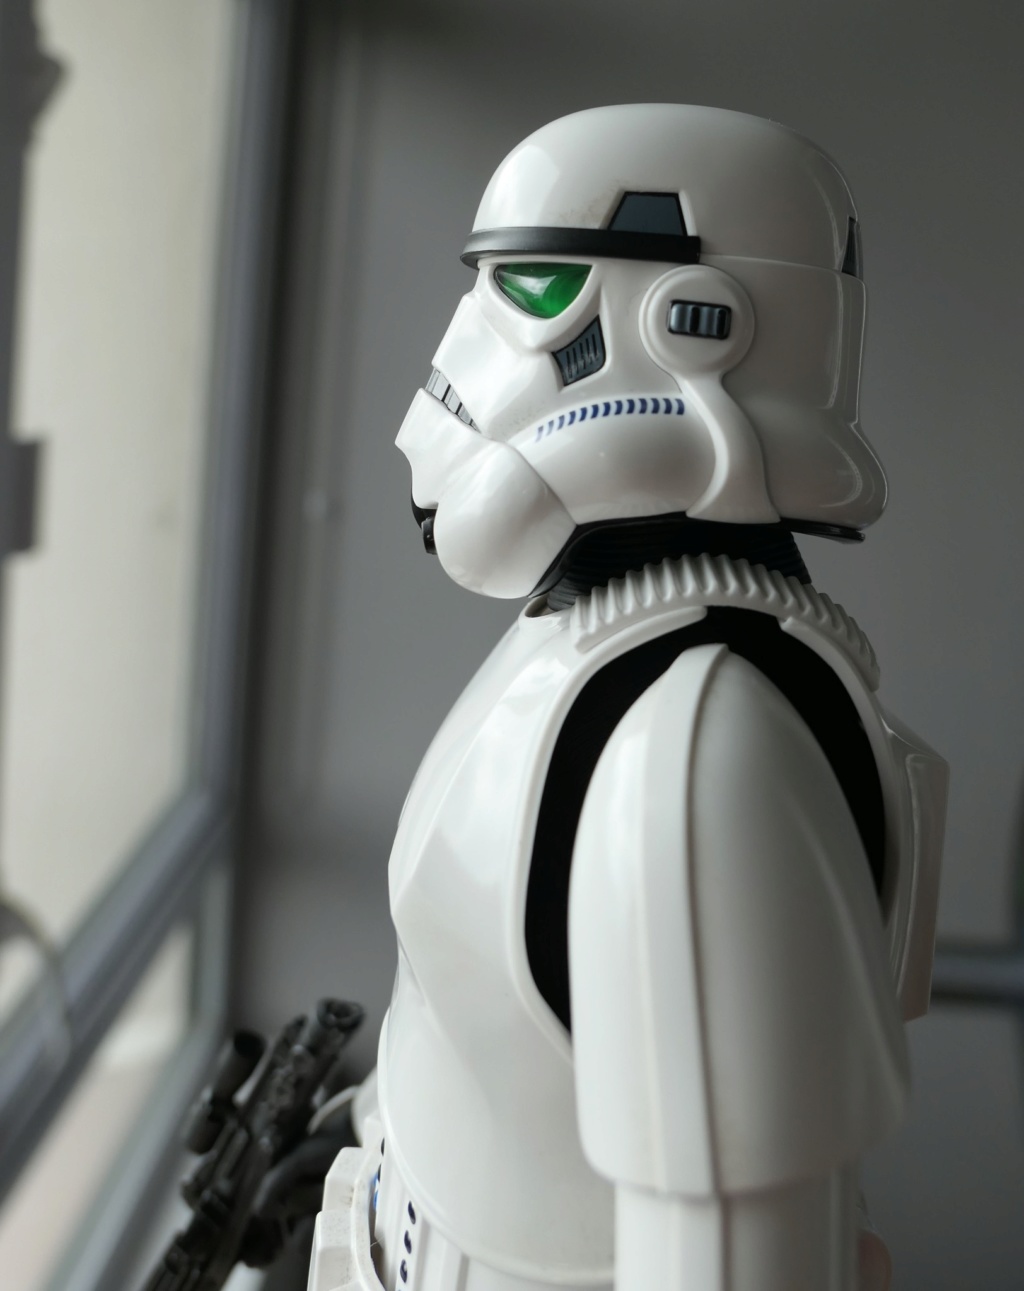 movie - NEW PRODUCT: HOT TOYS: STAR WARS STORMTROOPER (DELUXE VERSION) 1/6TH SCALE COLLECTIBLE FIGURE - Page 2 2h6slc10